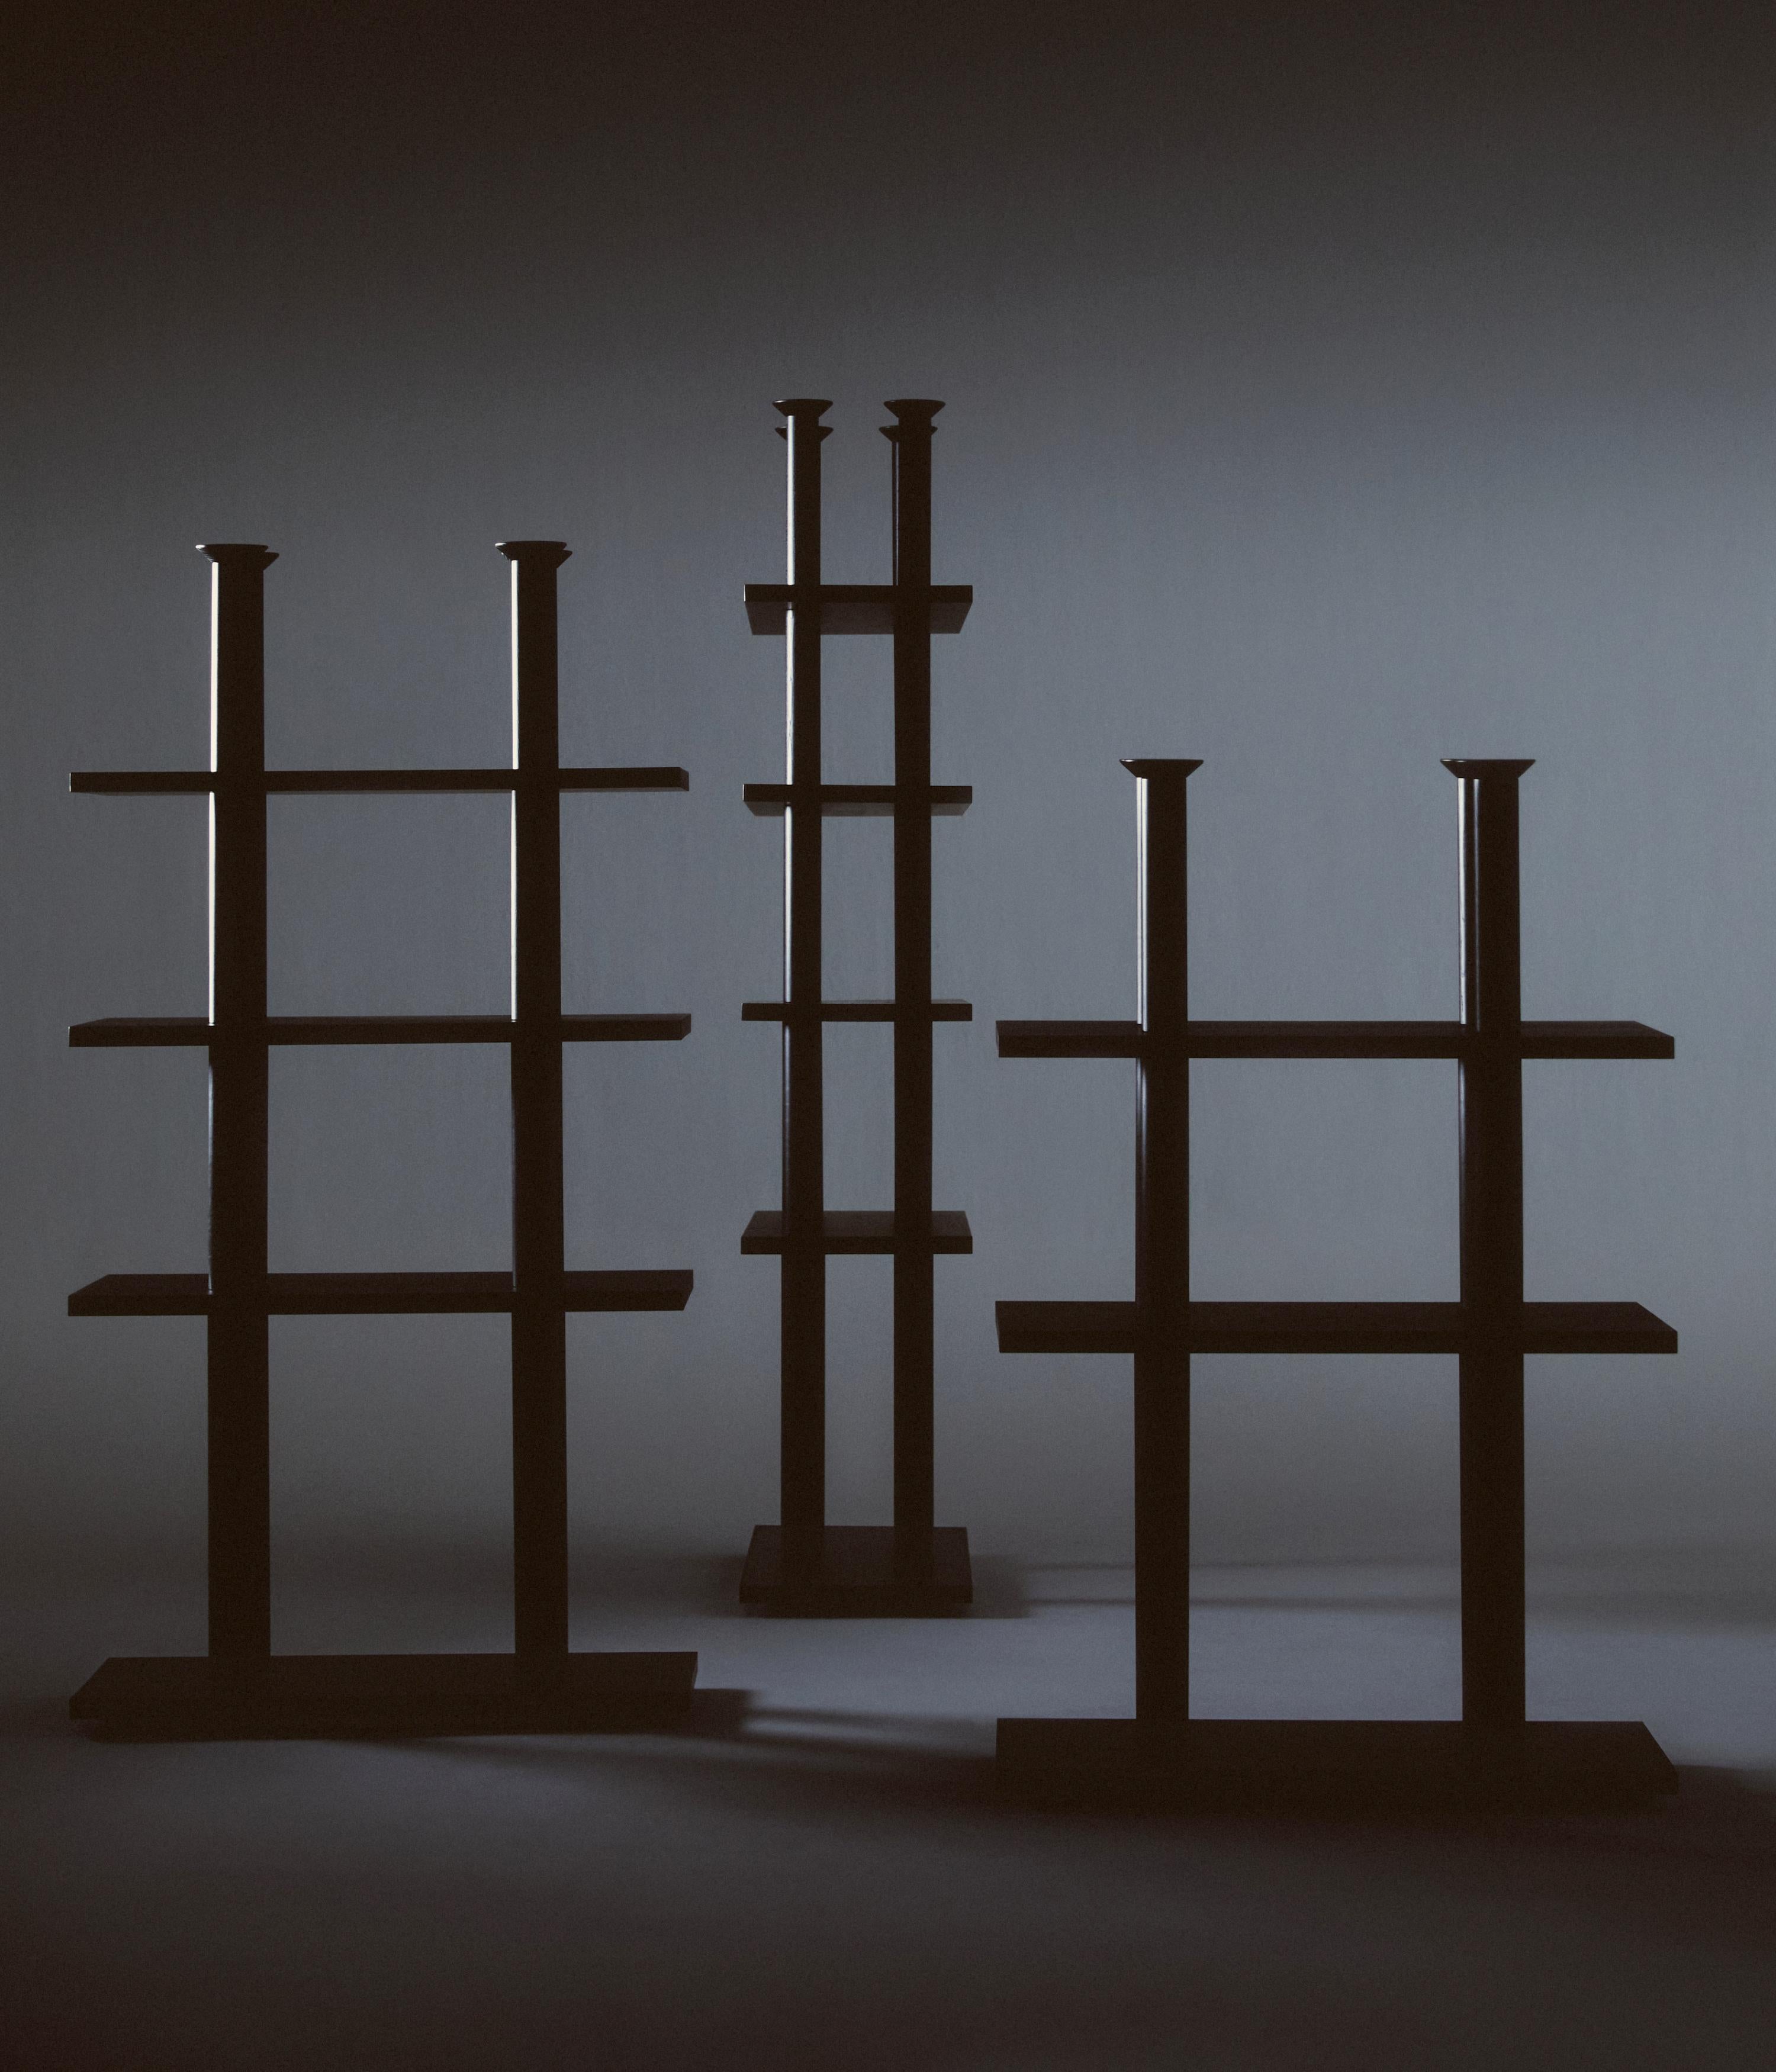 Set of 3 Peristylo Shelves by Oscar Tusquets
Dimensions: 4 Shelves: D 40 x W 92 x H 211 cm.
3 Shelves: D 40 x W 92 x H 176 cm.
2 Shelves: D 40 x W 92 x H 141 cm.
Materials: Solid ash wood and stained black wood.

Shelving and base in solid ash